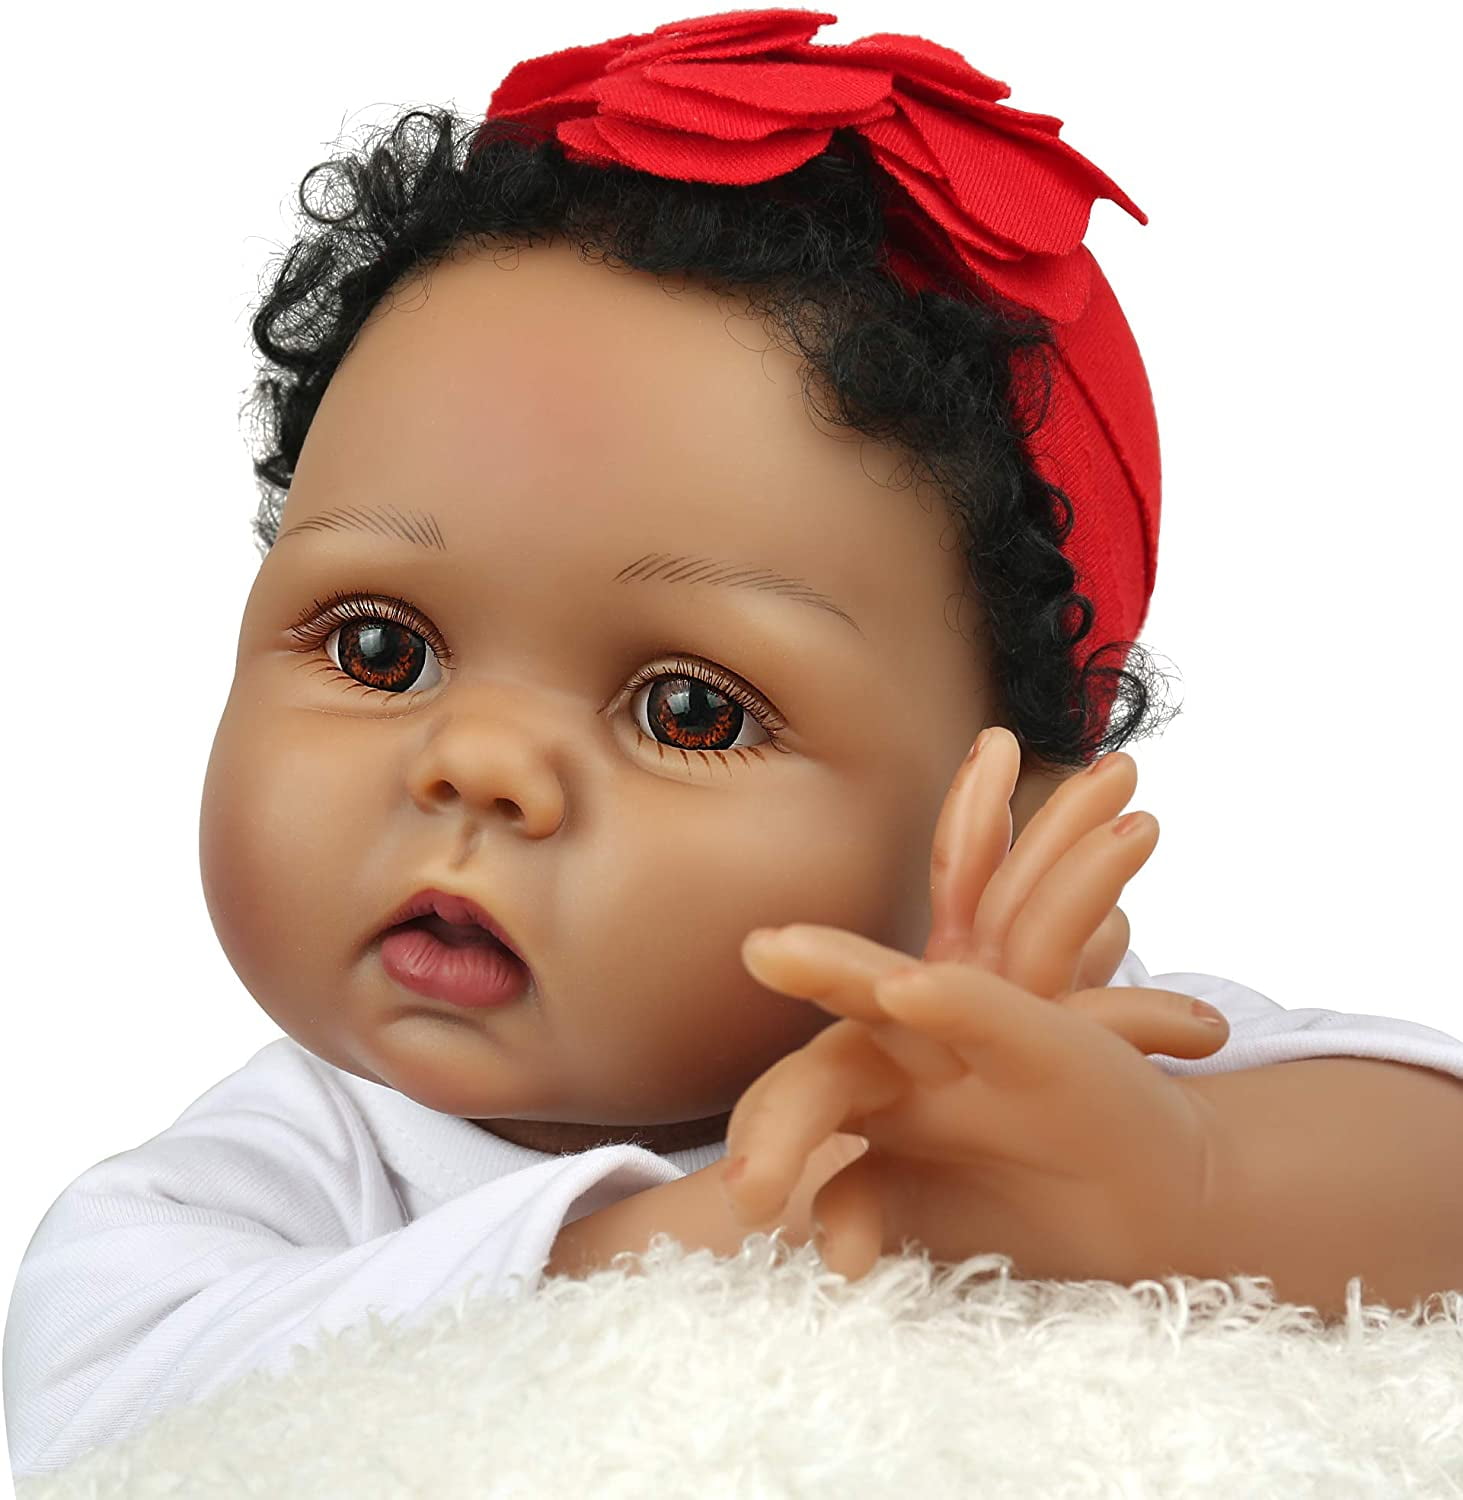 Lifelike Weighted Silicone Reborn Real Toddler KSBD Reborn Baby Dolls Girl 22 Inch Realistic Newborn Baby Doll